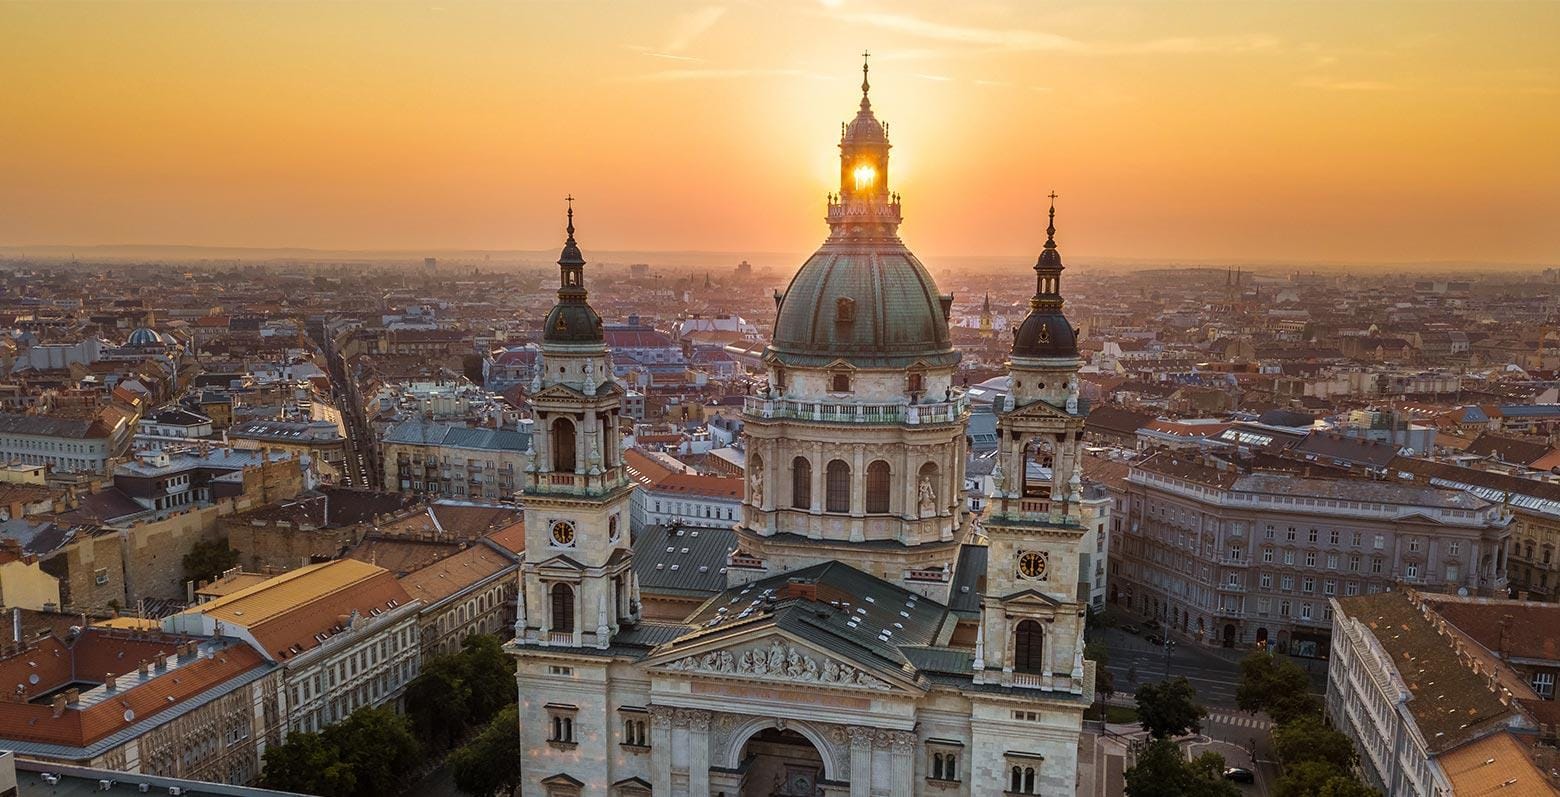 Budapest's "Top Attractions" -Visit St. Stephen's Basilica